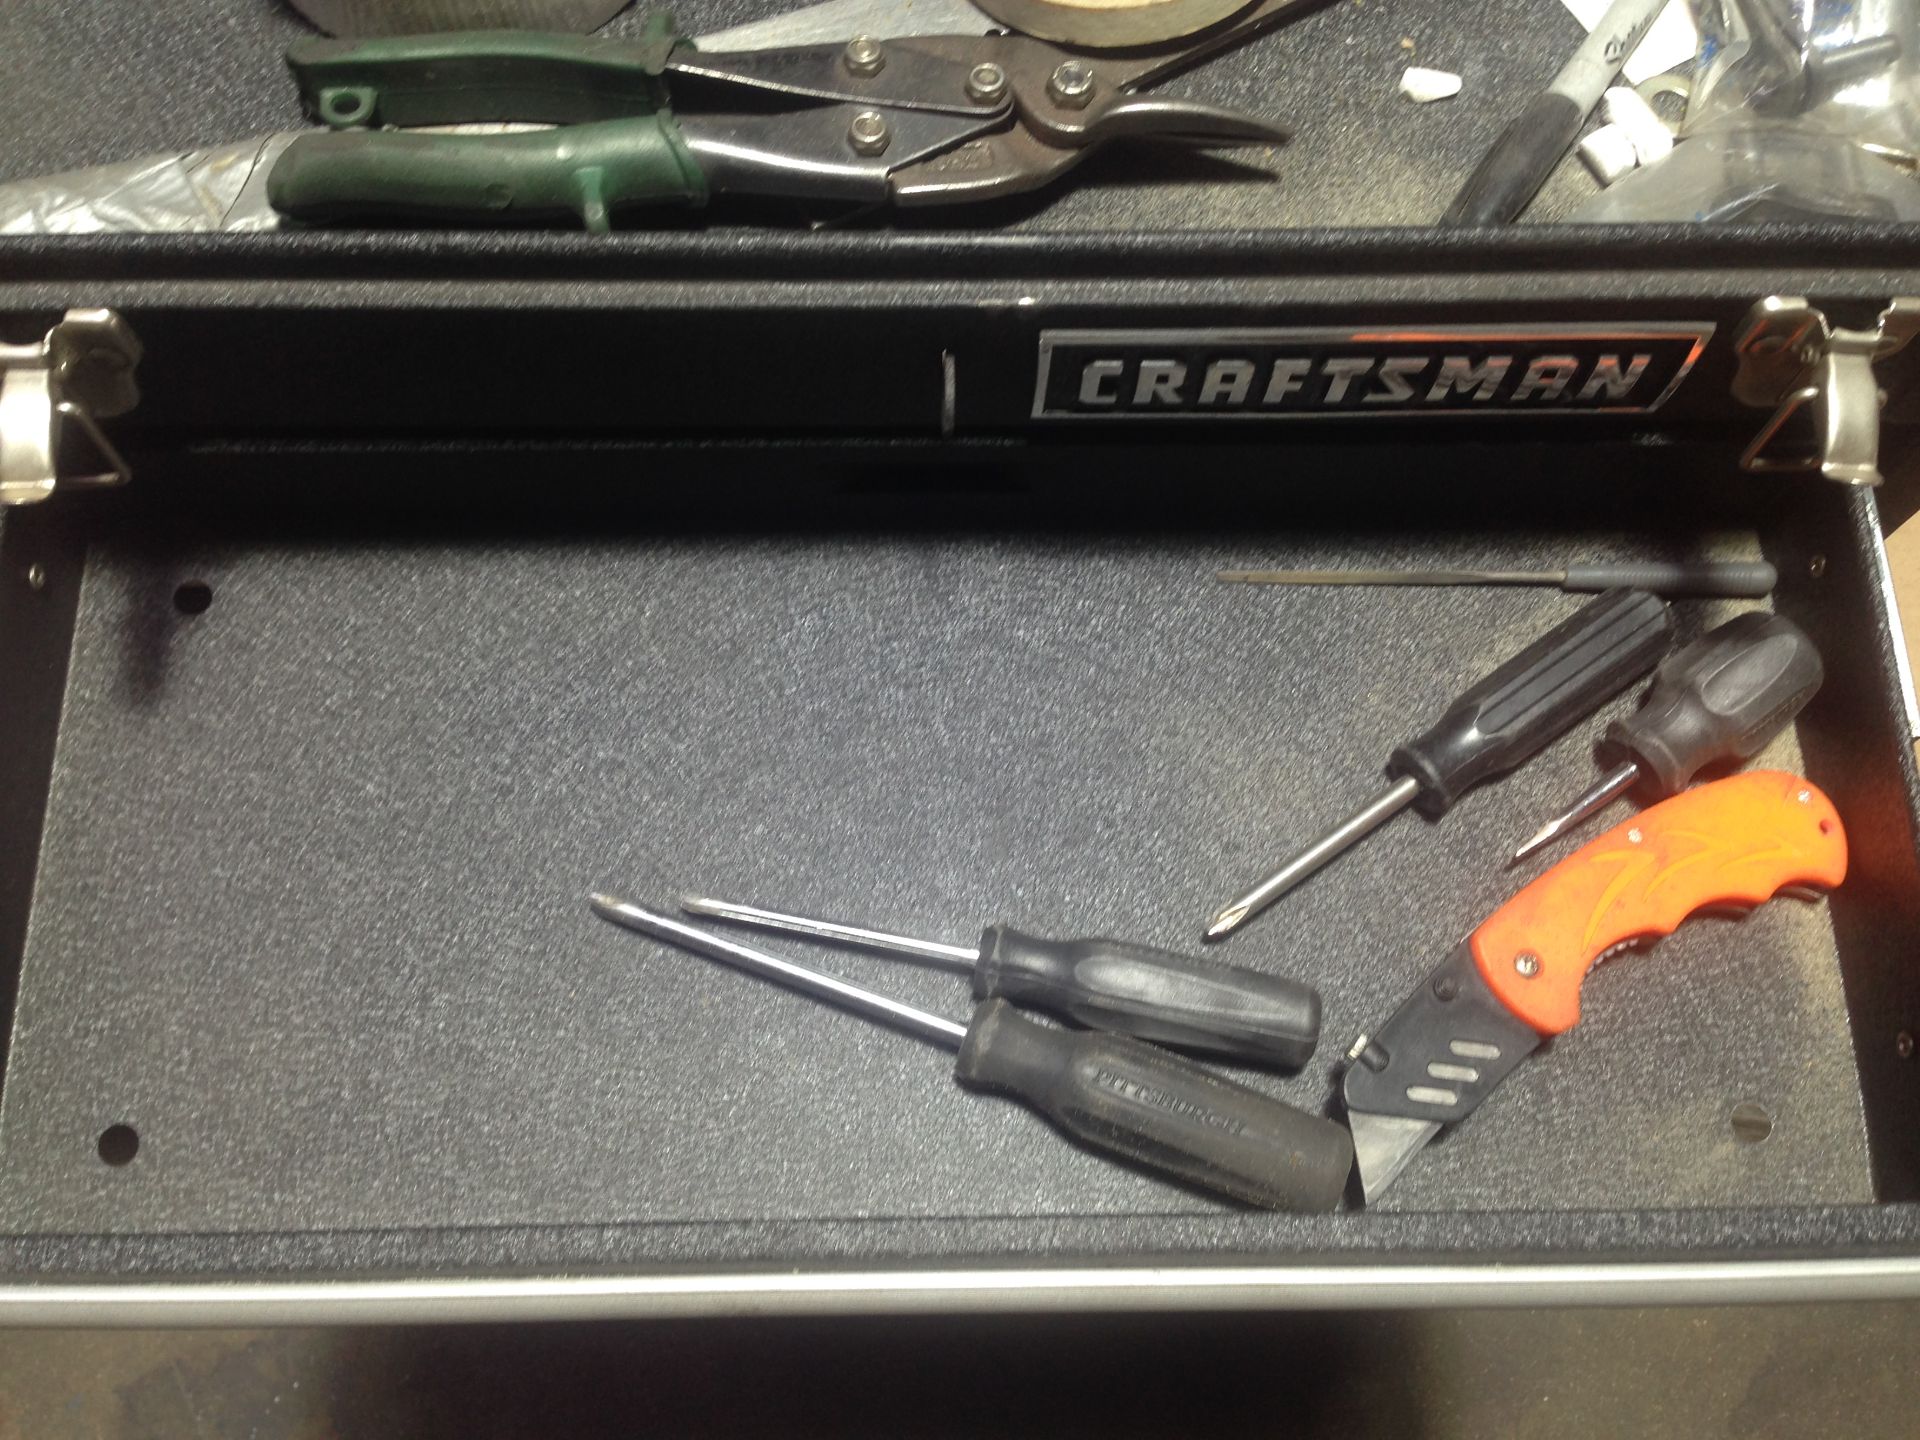 LOT - CRAFTSMAN 4-DRAWER TOOL BOX, W/ CONTENTS TO INCLUDE: WRENCHES, SCREWDRIVERS, ETC. - Image 3 of 5